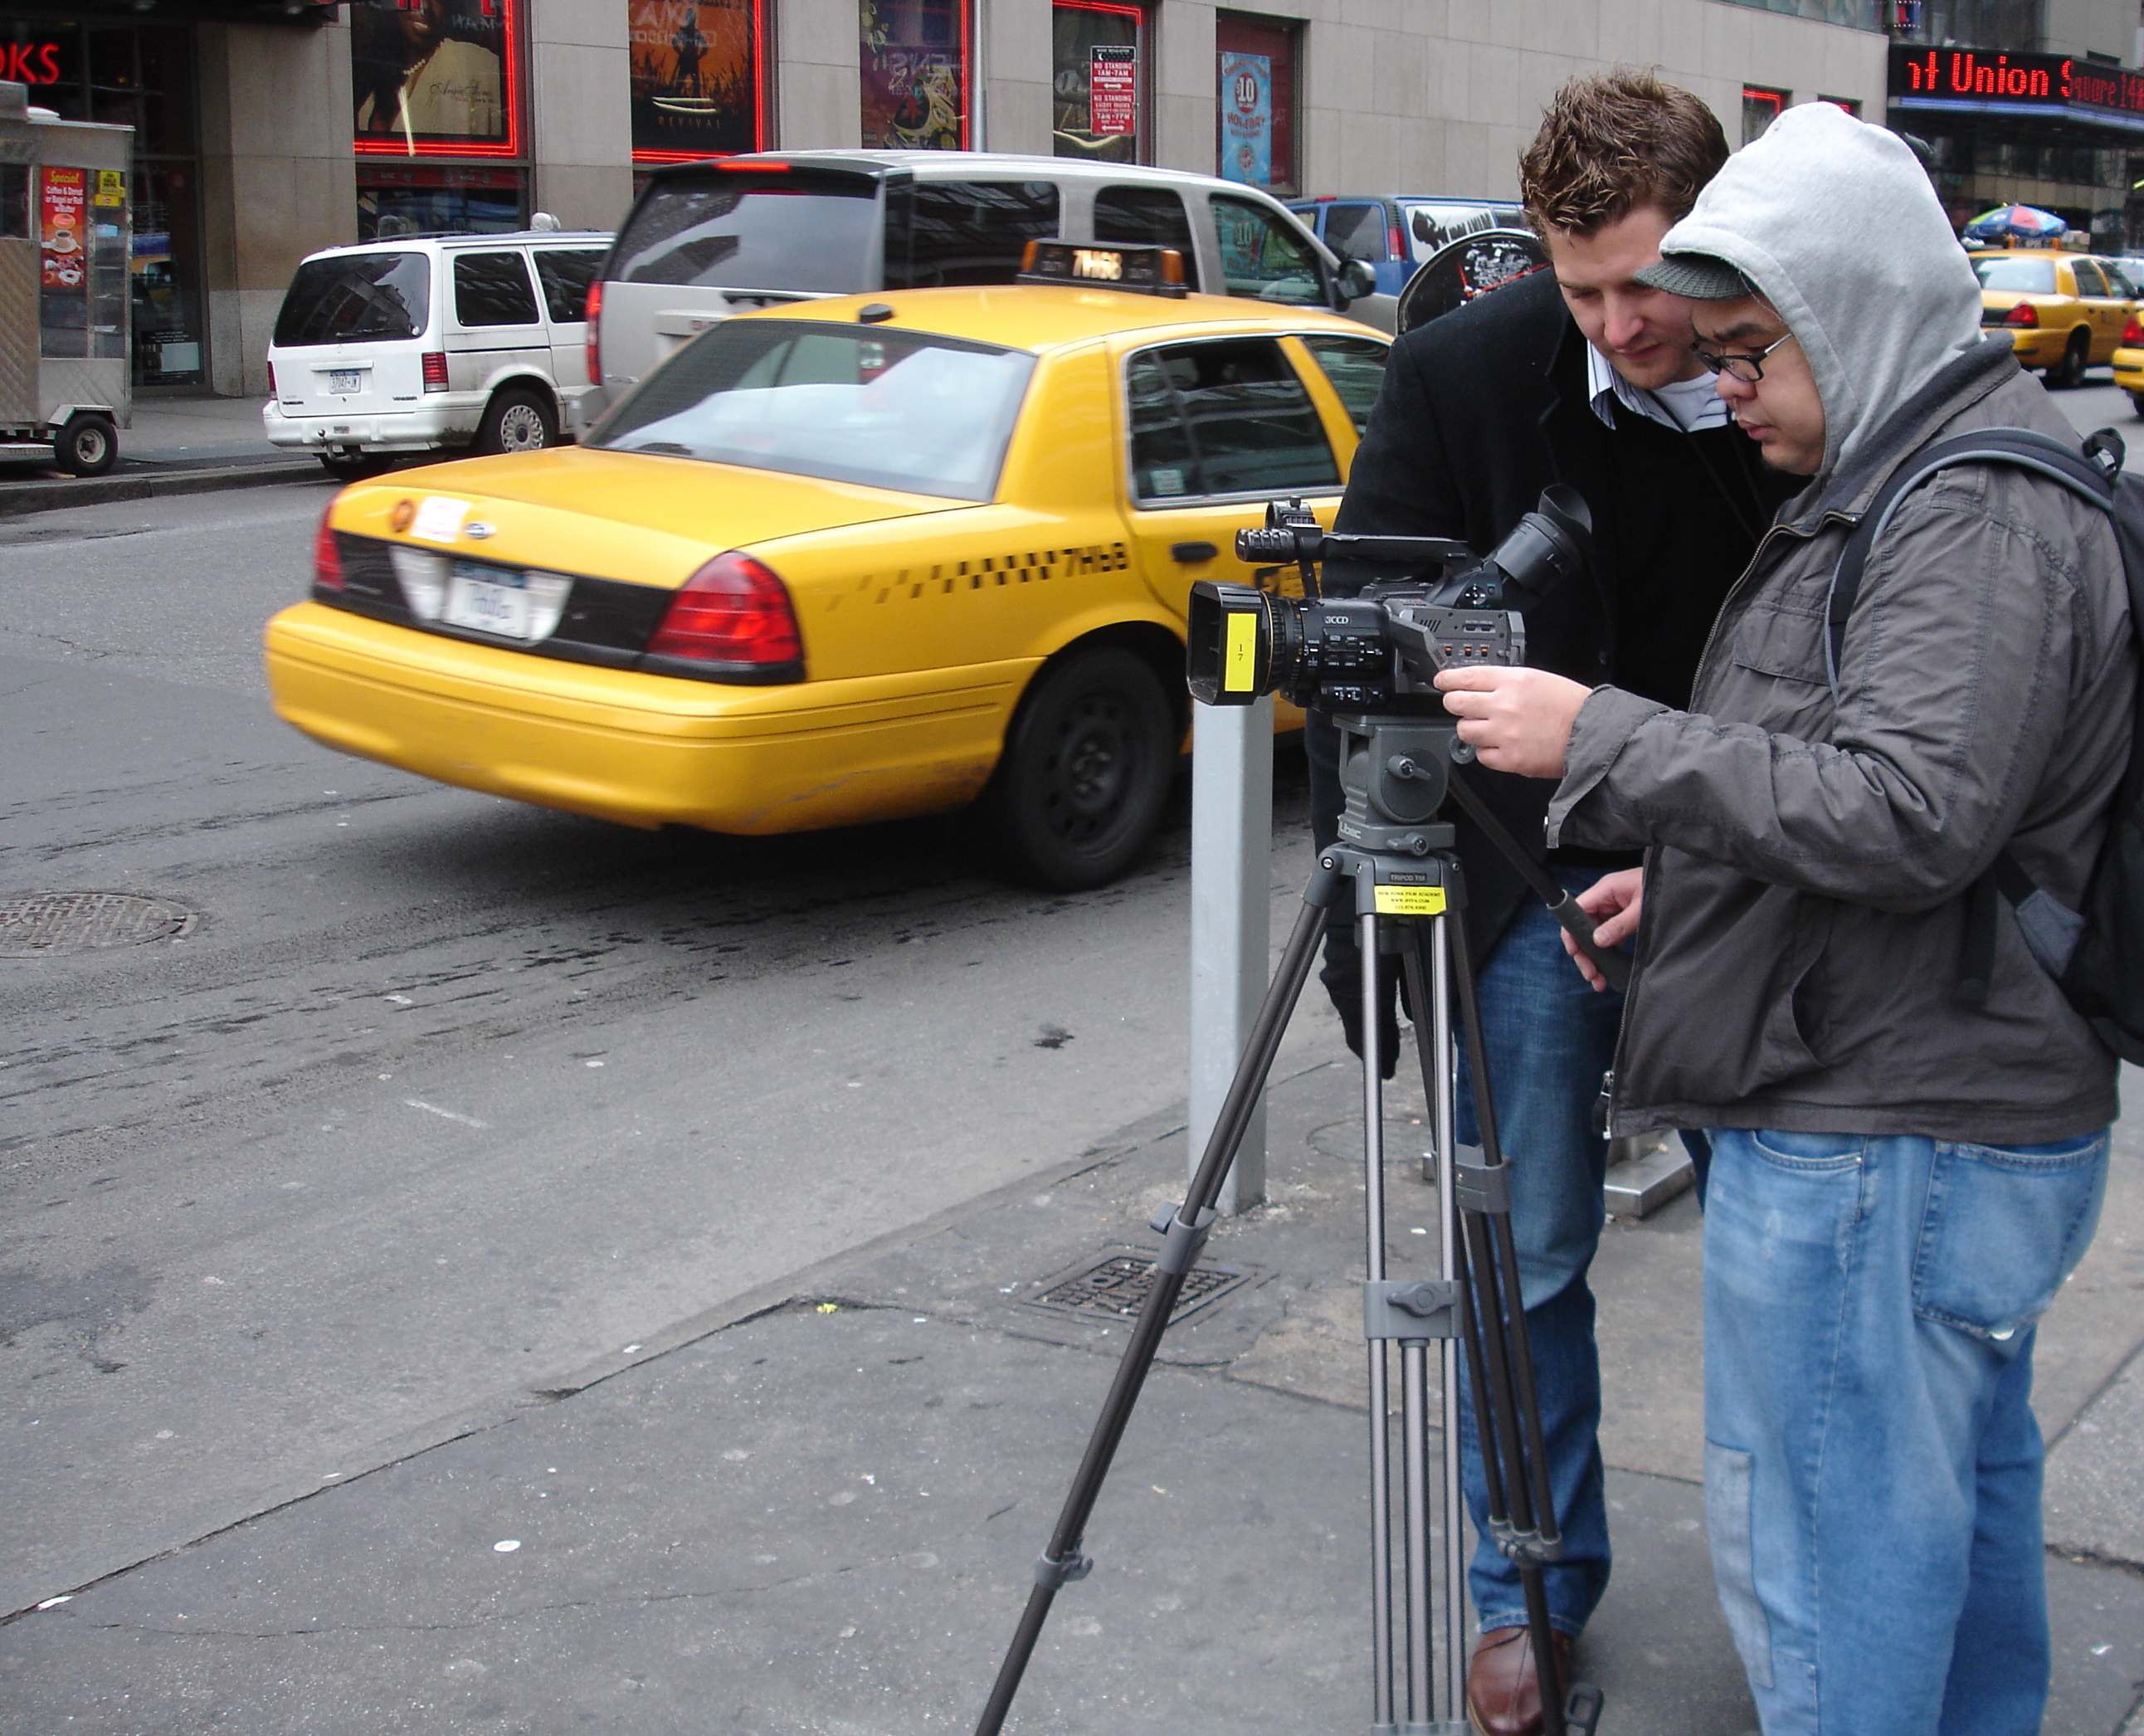 Filming in New York